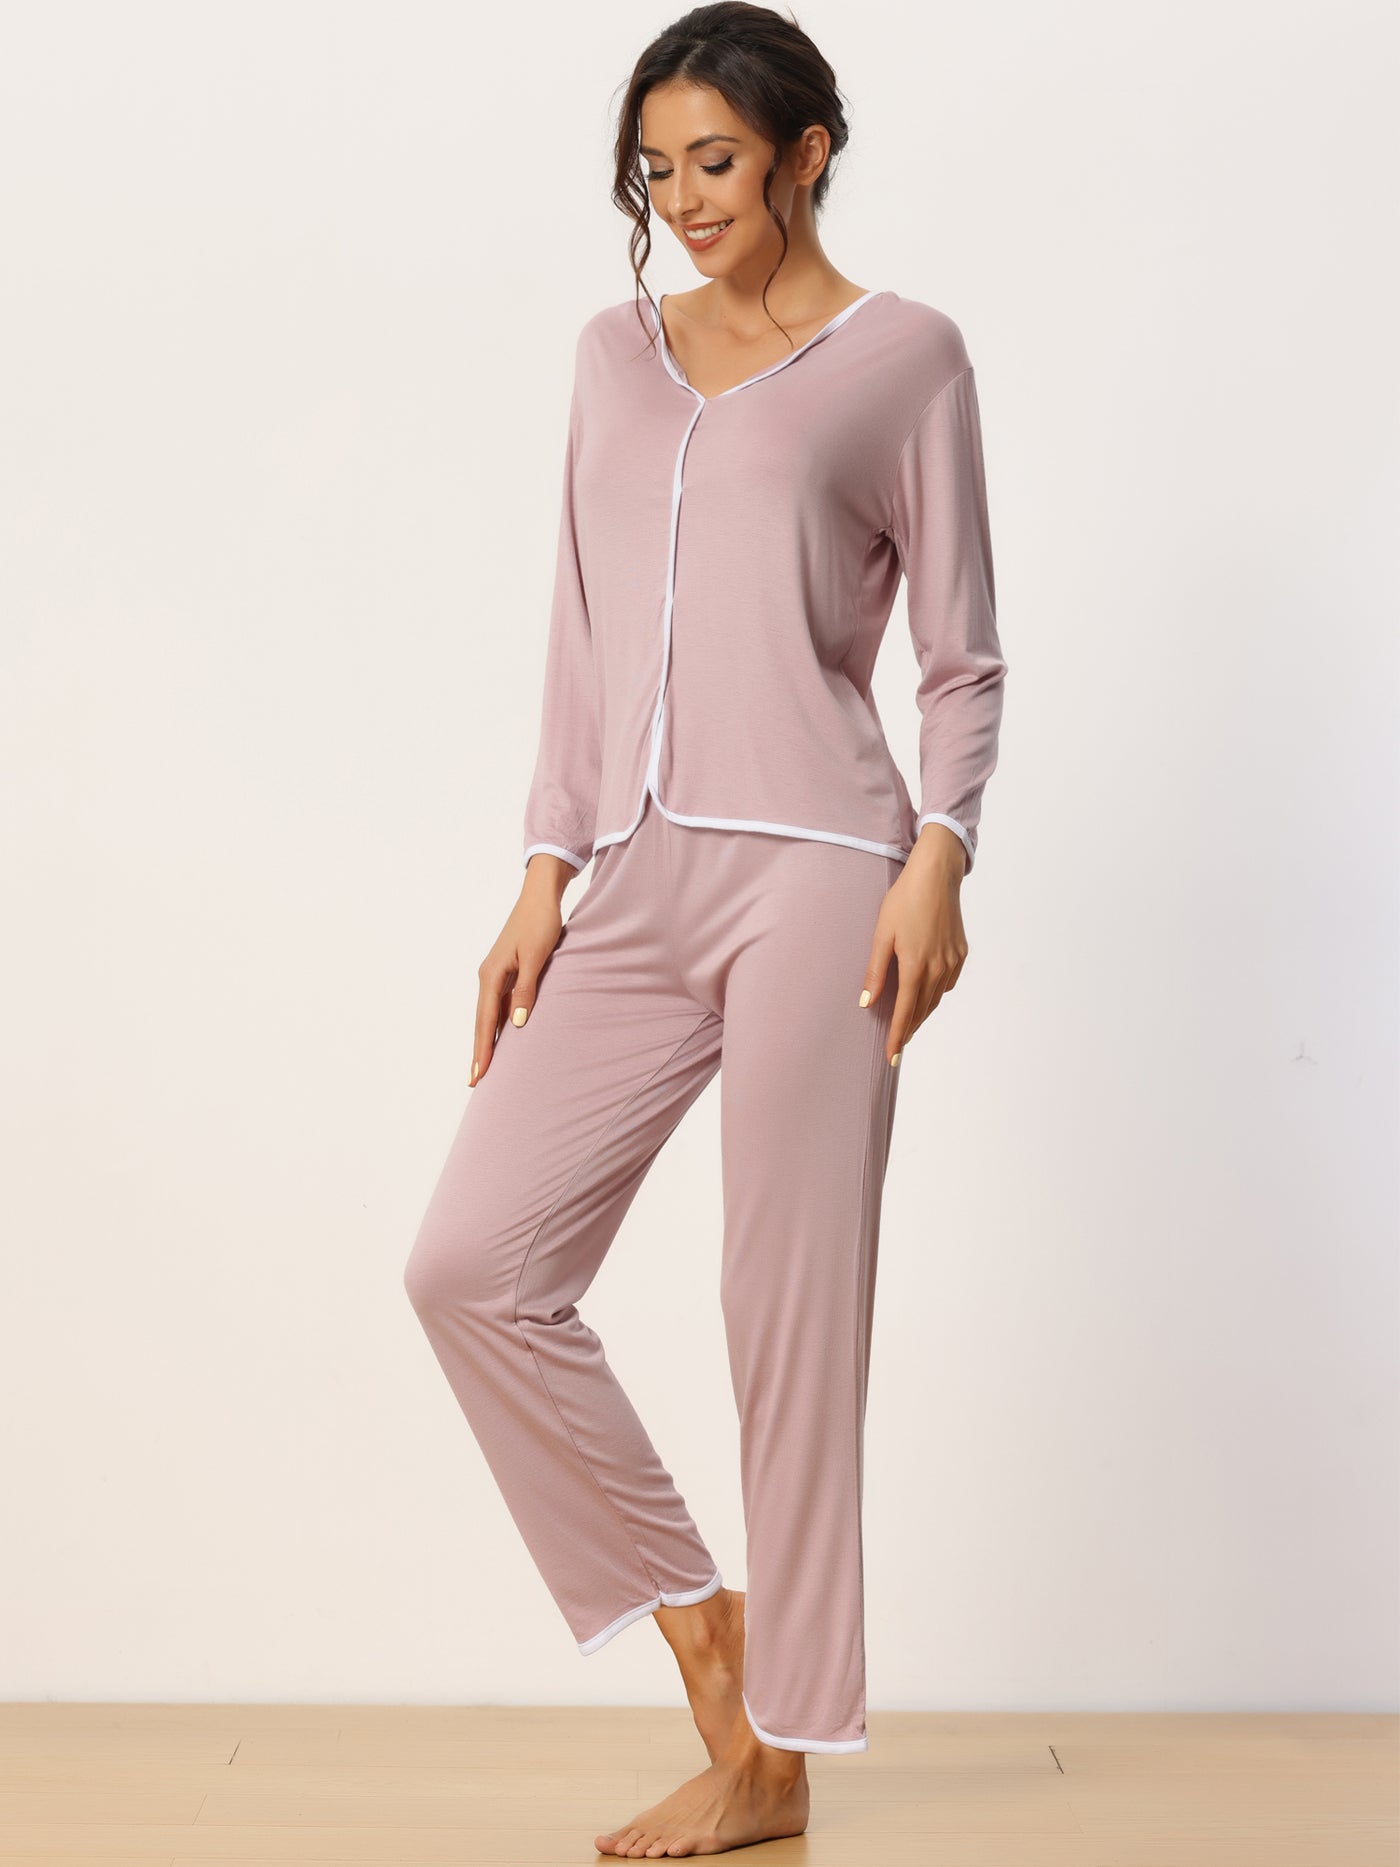 Bublédon Womens Sleepwear Pajamas Long Sleeve Pullover Tops with Pants Lounge Sets